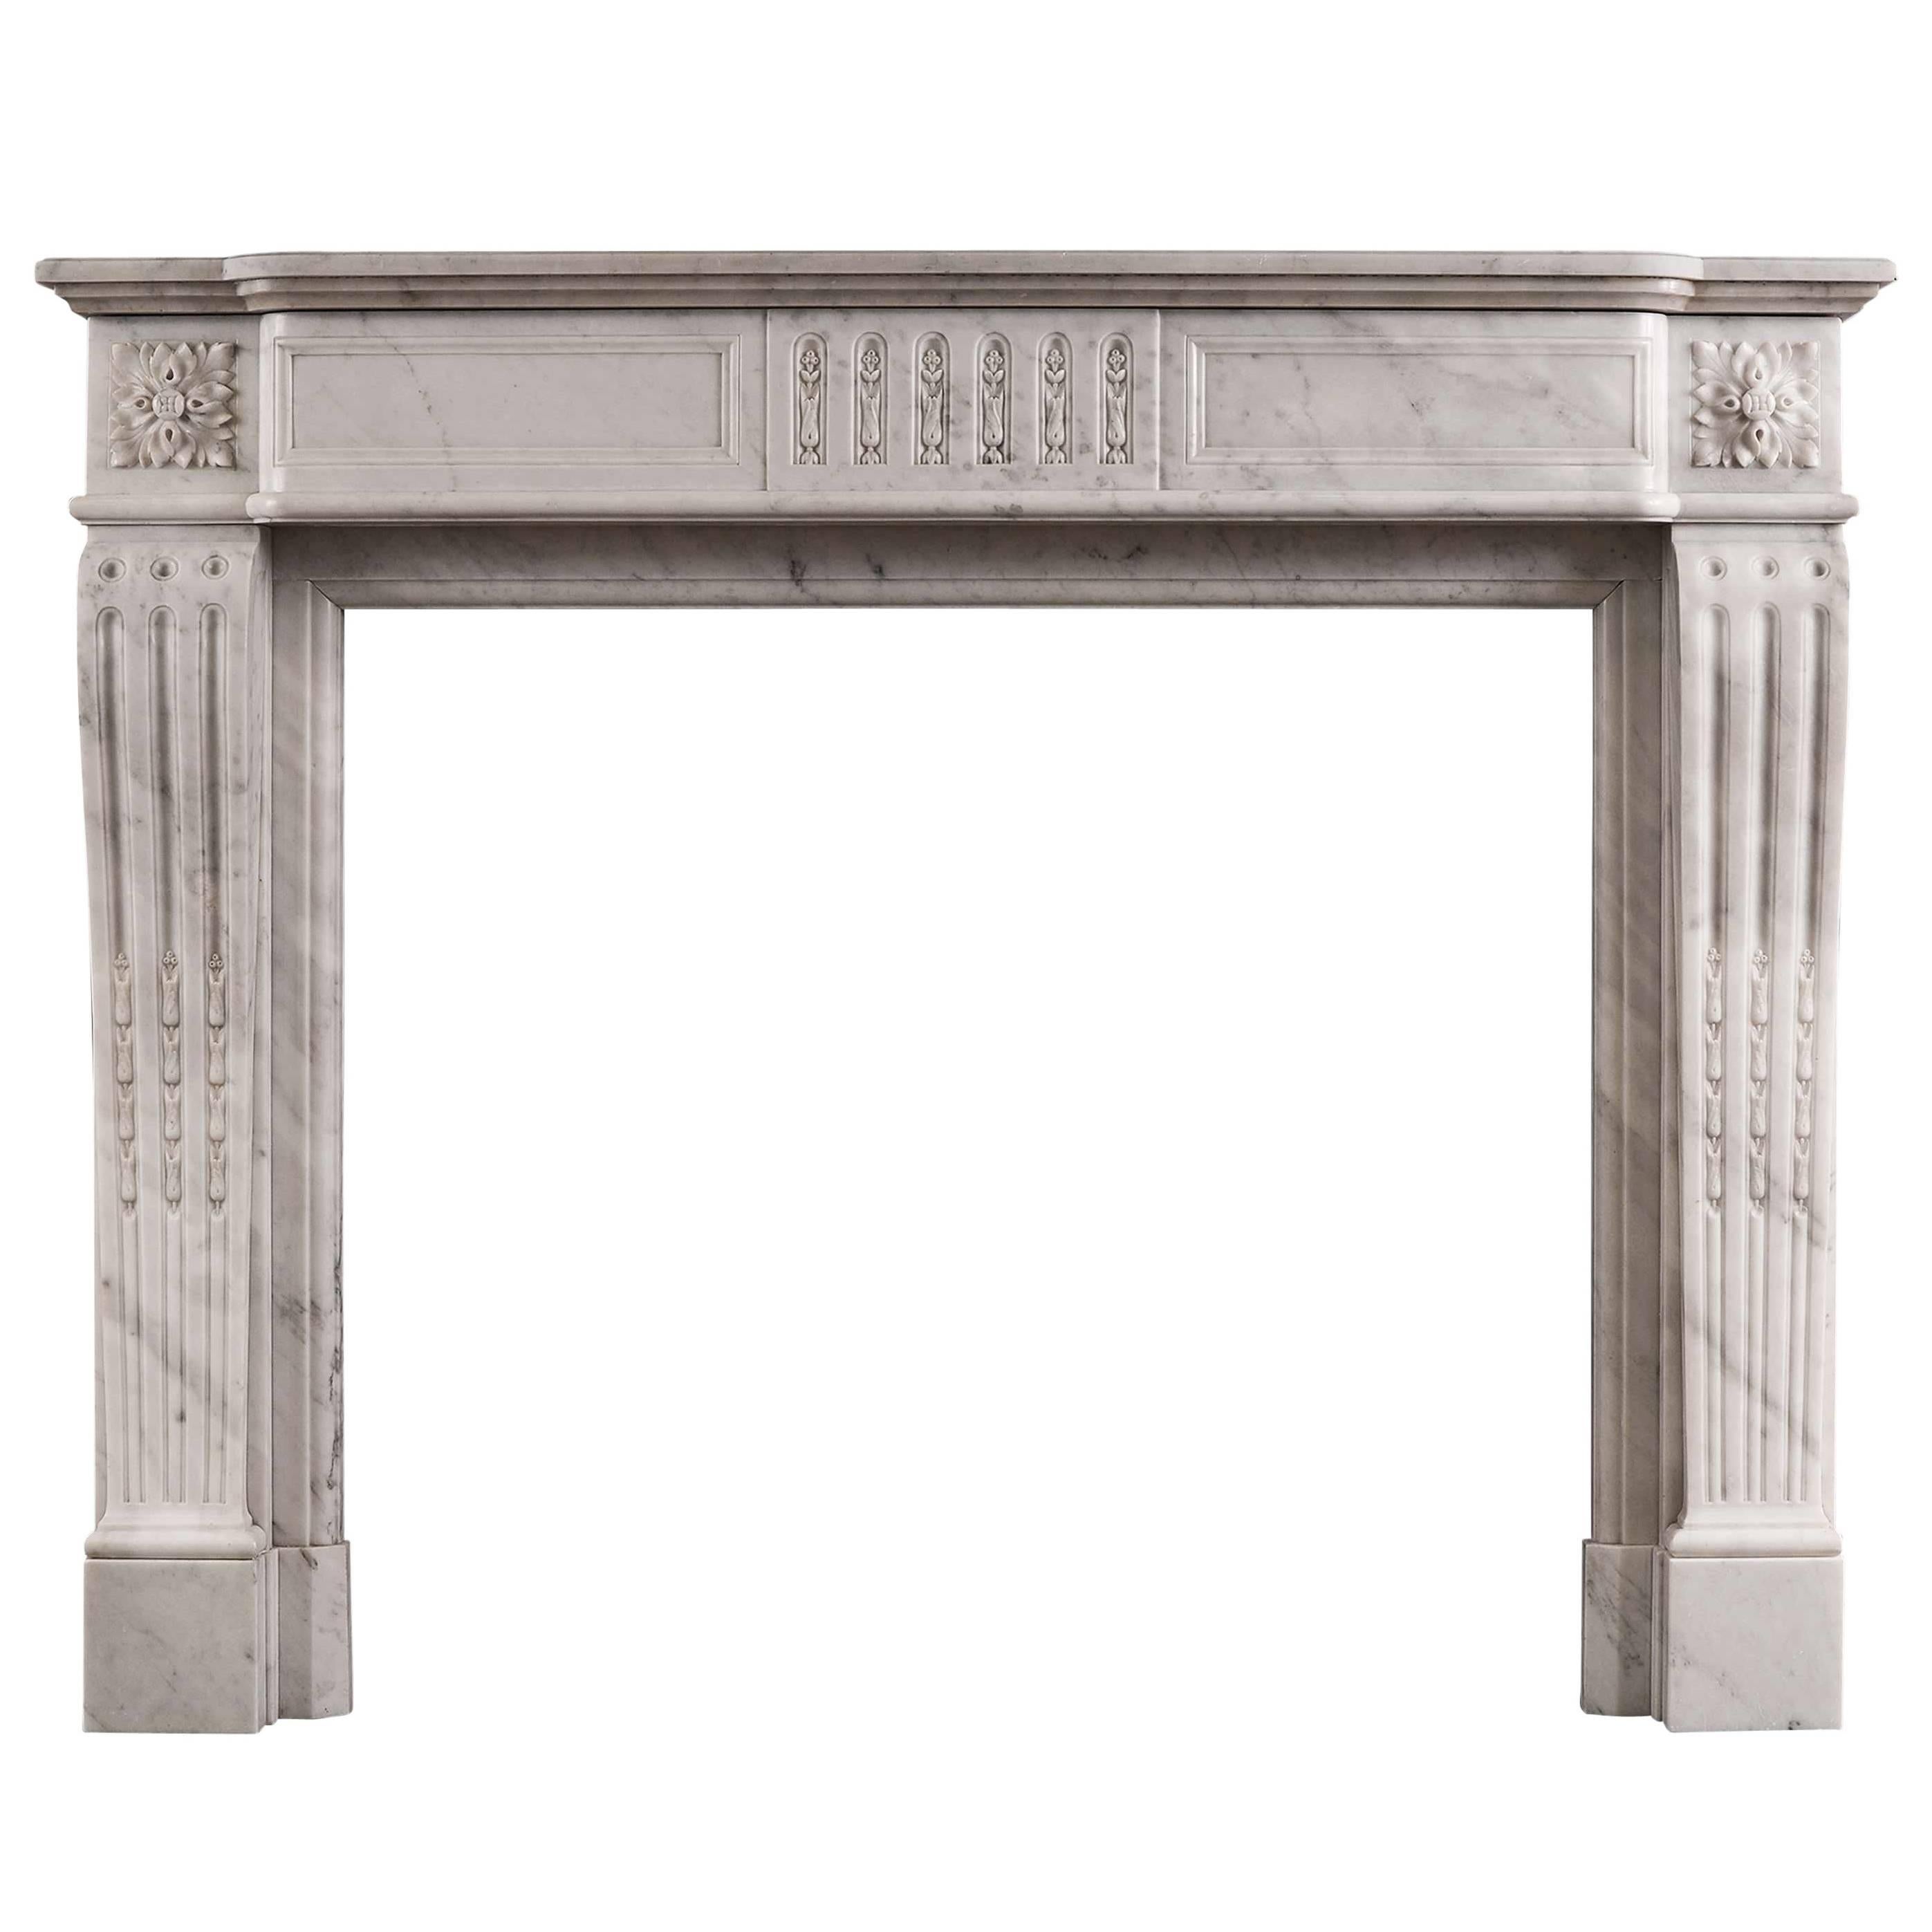 Louis XVI Style Fireplace in Carrara Marble